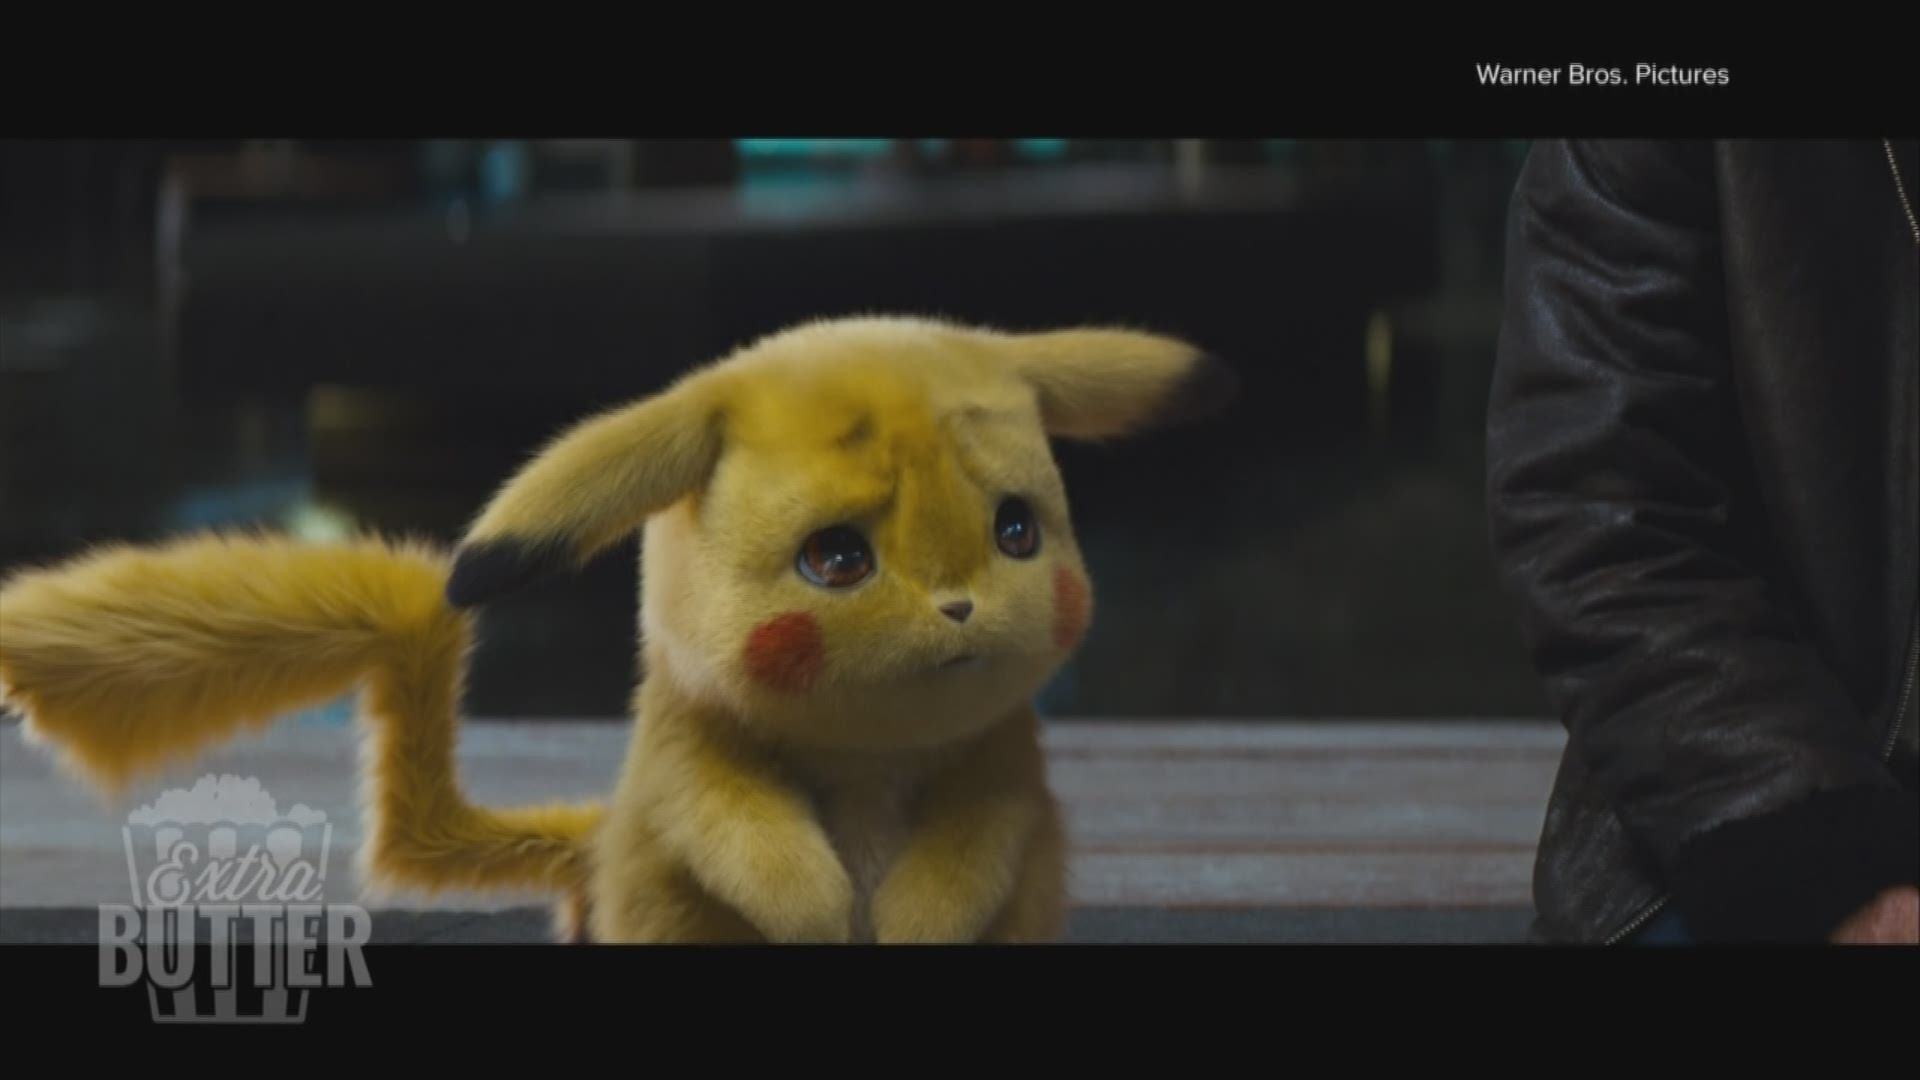 'Pokemon: Detective Pikachu' is set to have another big weekend at the box office. Gloria talks with Ryan Reynolds about the motion capture work that went into playing Pikachu.